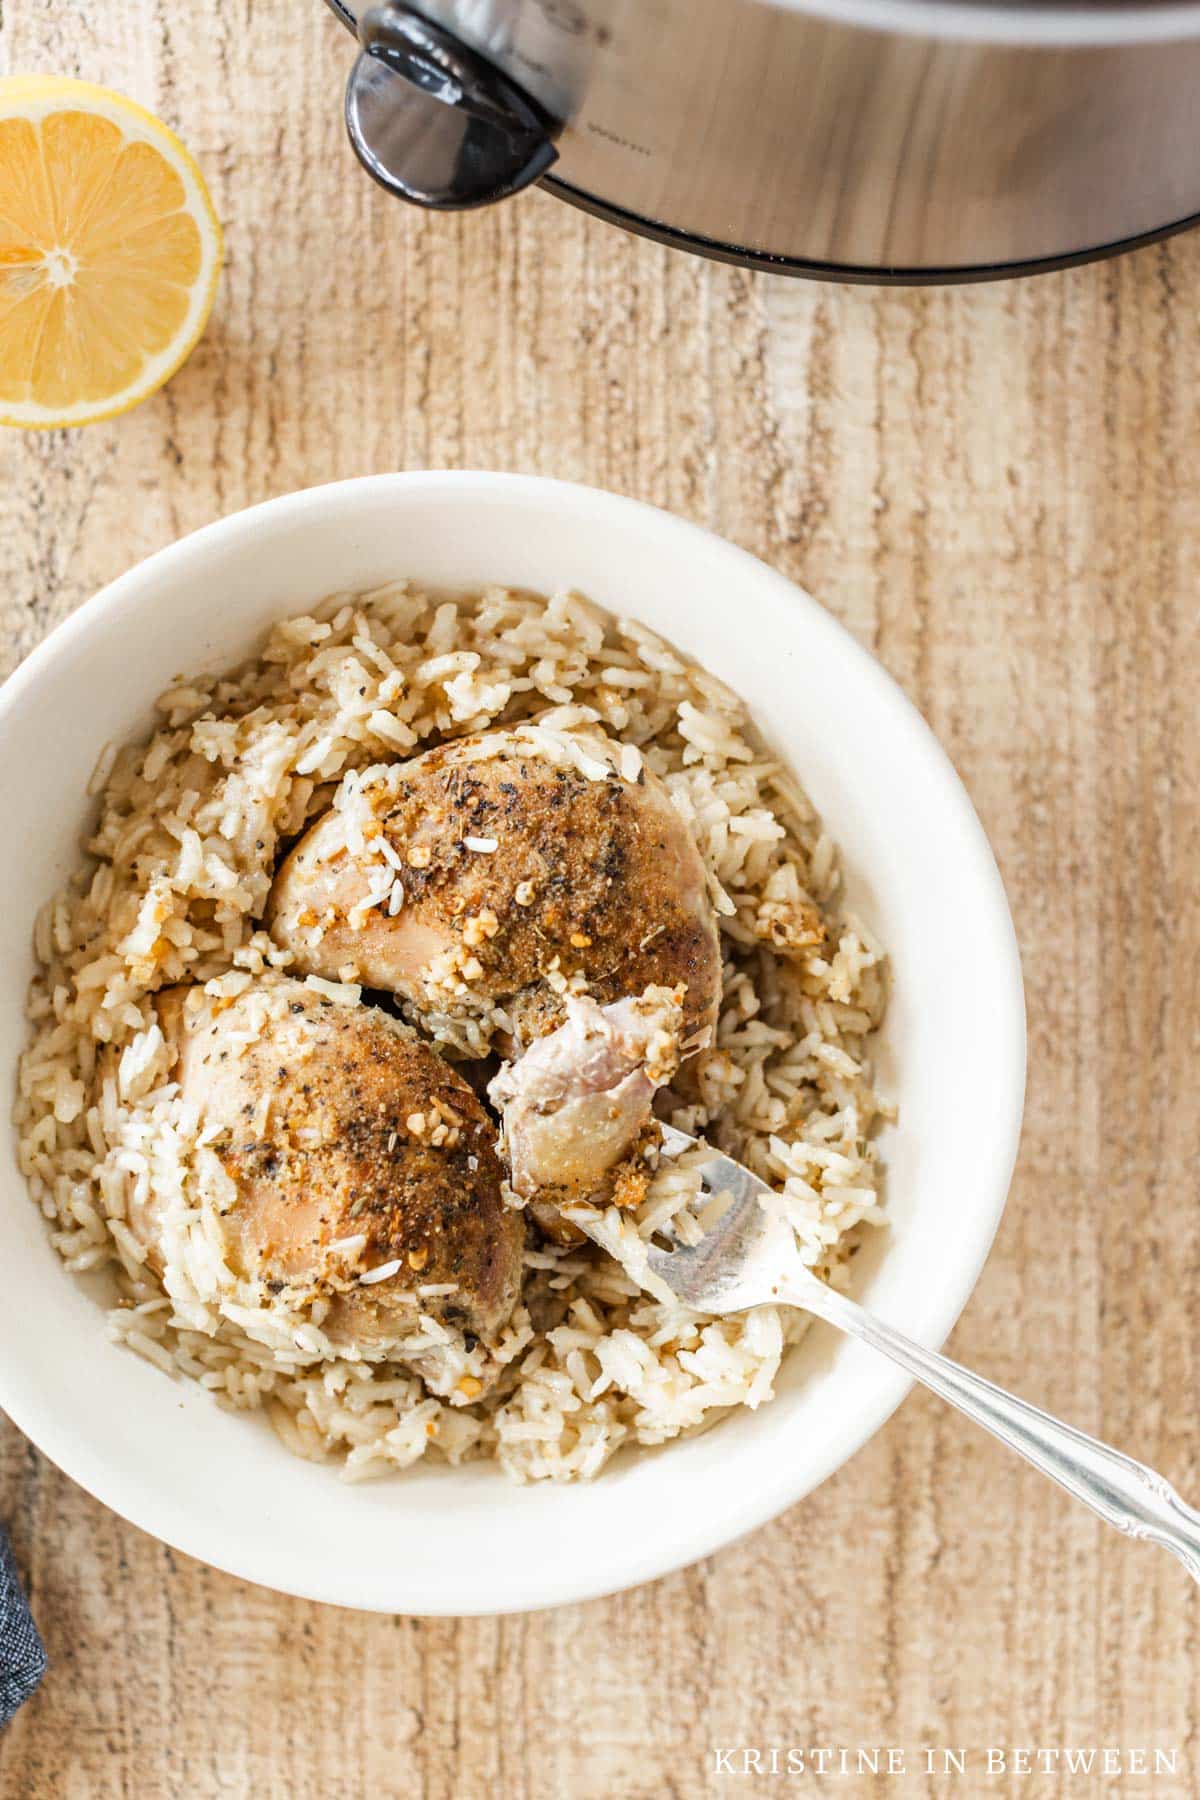 A bite of chicken on a fork sitting in a bowl of cooked chicken thighs and rice.